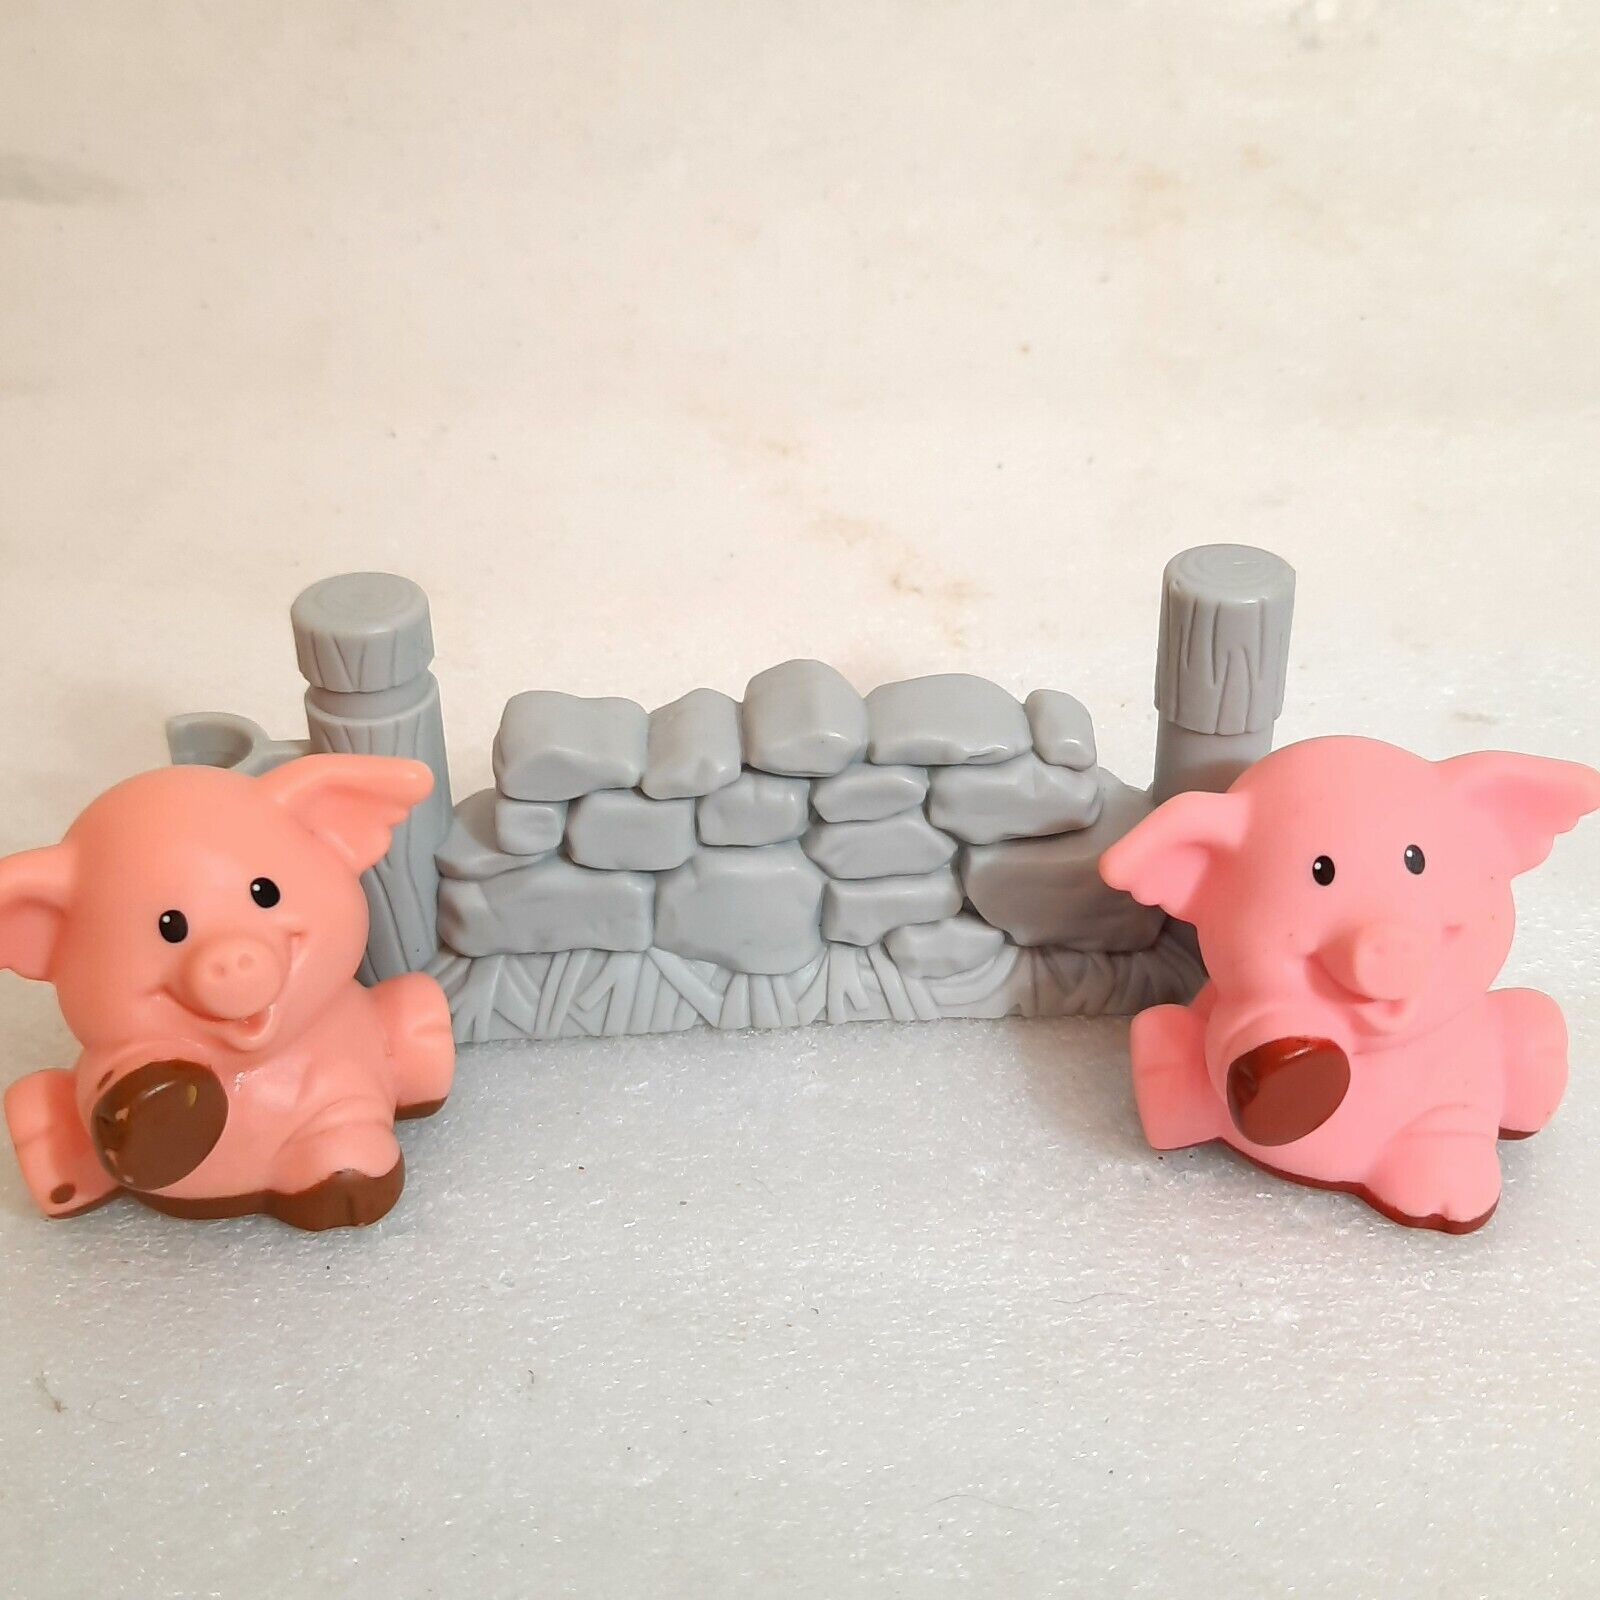 Fisher Price Little People Baby Pig Piglet Mud Farm Animal & stone fence gate - $11.00